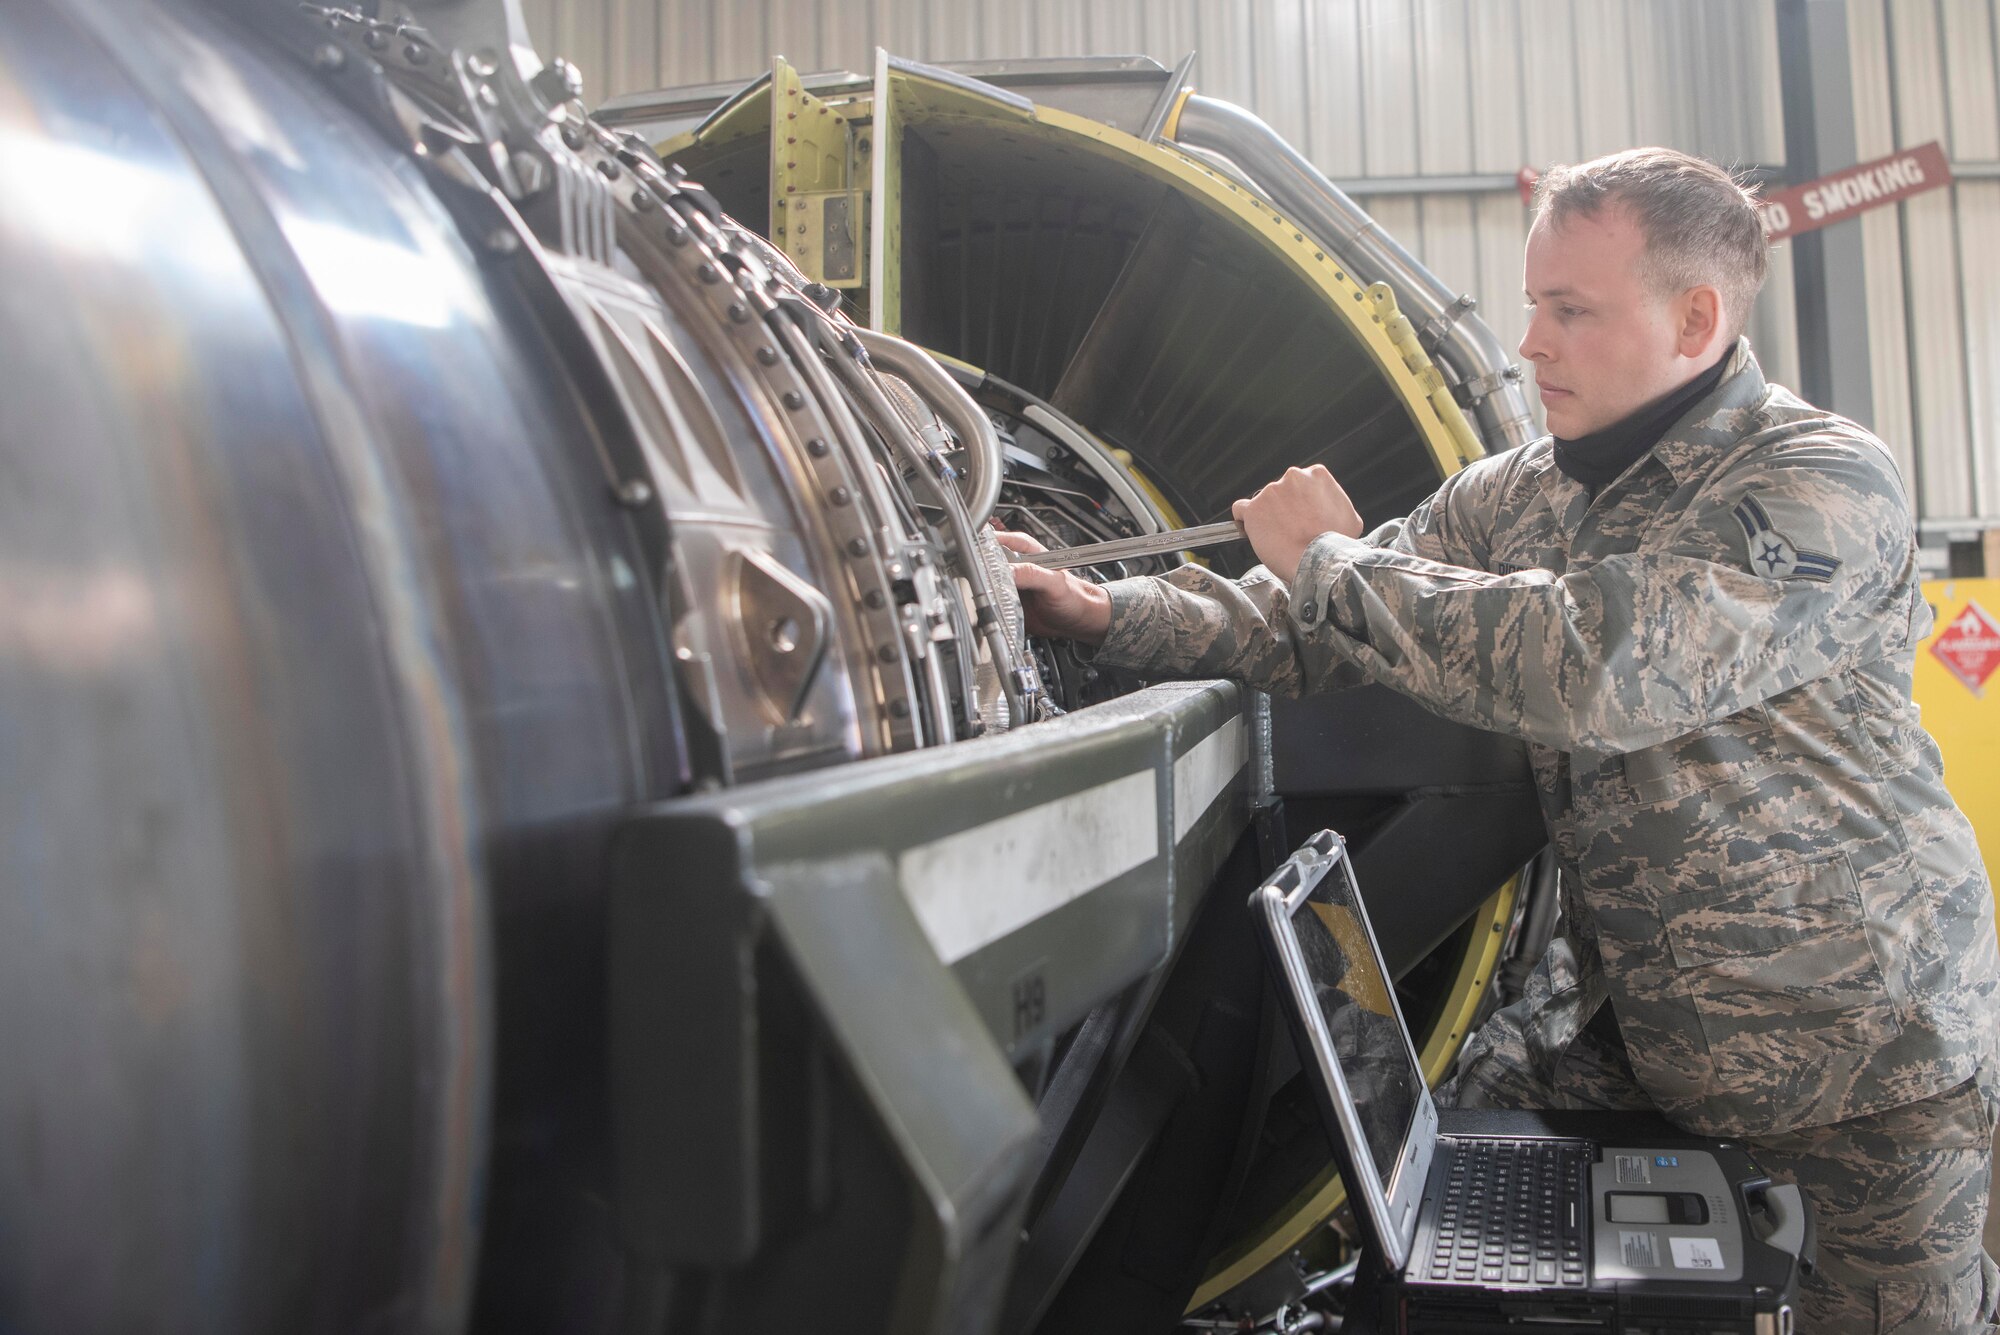 Airman 1st Class Eric Ridout, 100th Aircraft Maintenance Squadron aerospace propulsion apprentice, tightens a bolt on an F108 turbofan engine at RAF Mildenhall, England, June 9, 2020. In addition to repairing engines, the shop conducts periodic maintenance inspections after a certain number of flight hours. (U.S. Air Force photo by Airman 1st Class Joseph Barron)